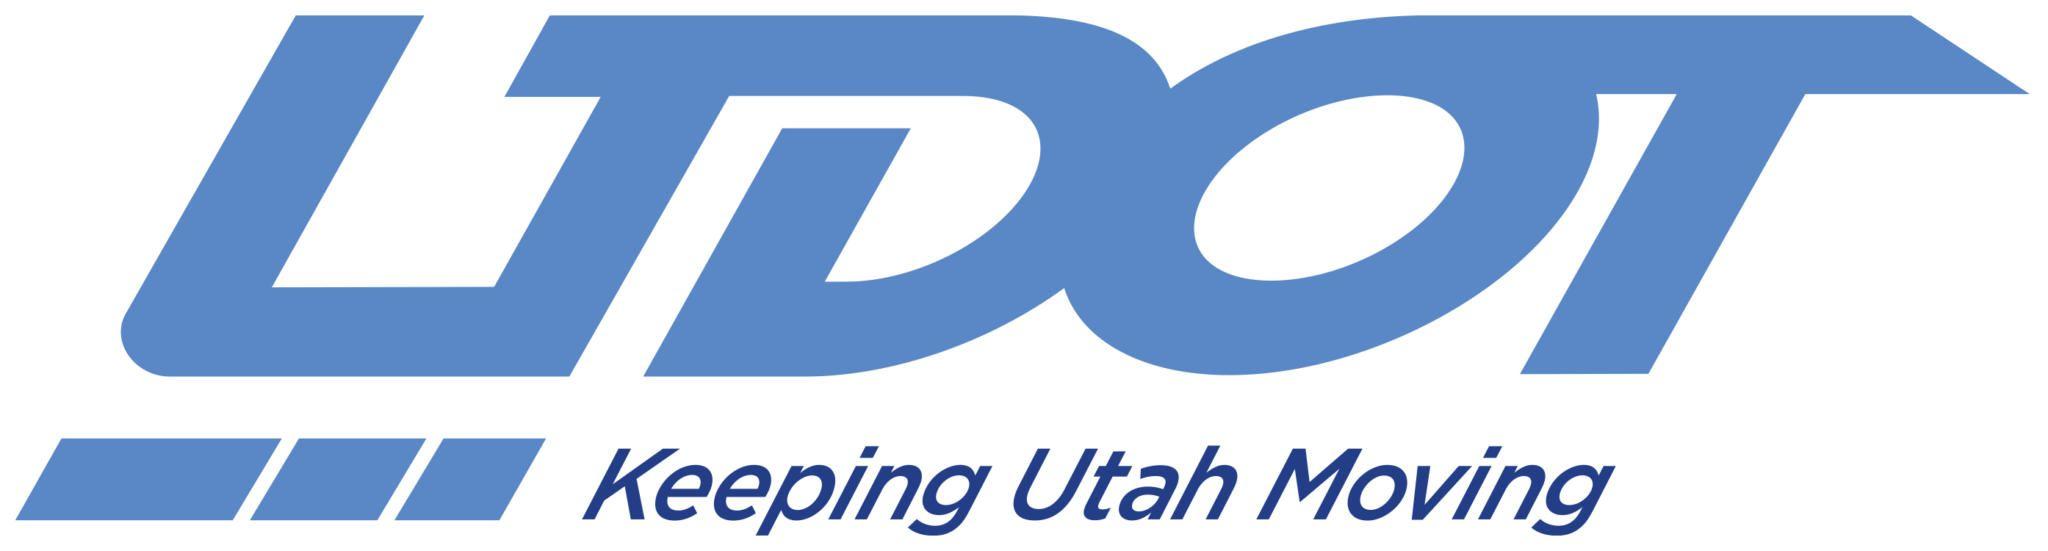 UDOT Logo - Vision and Mission announced at UDOT Annual Conference